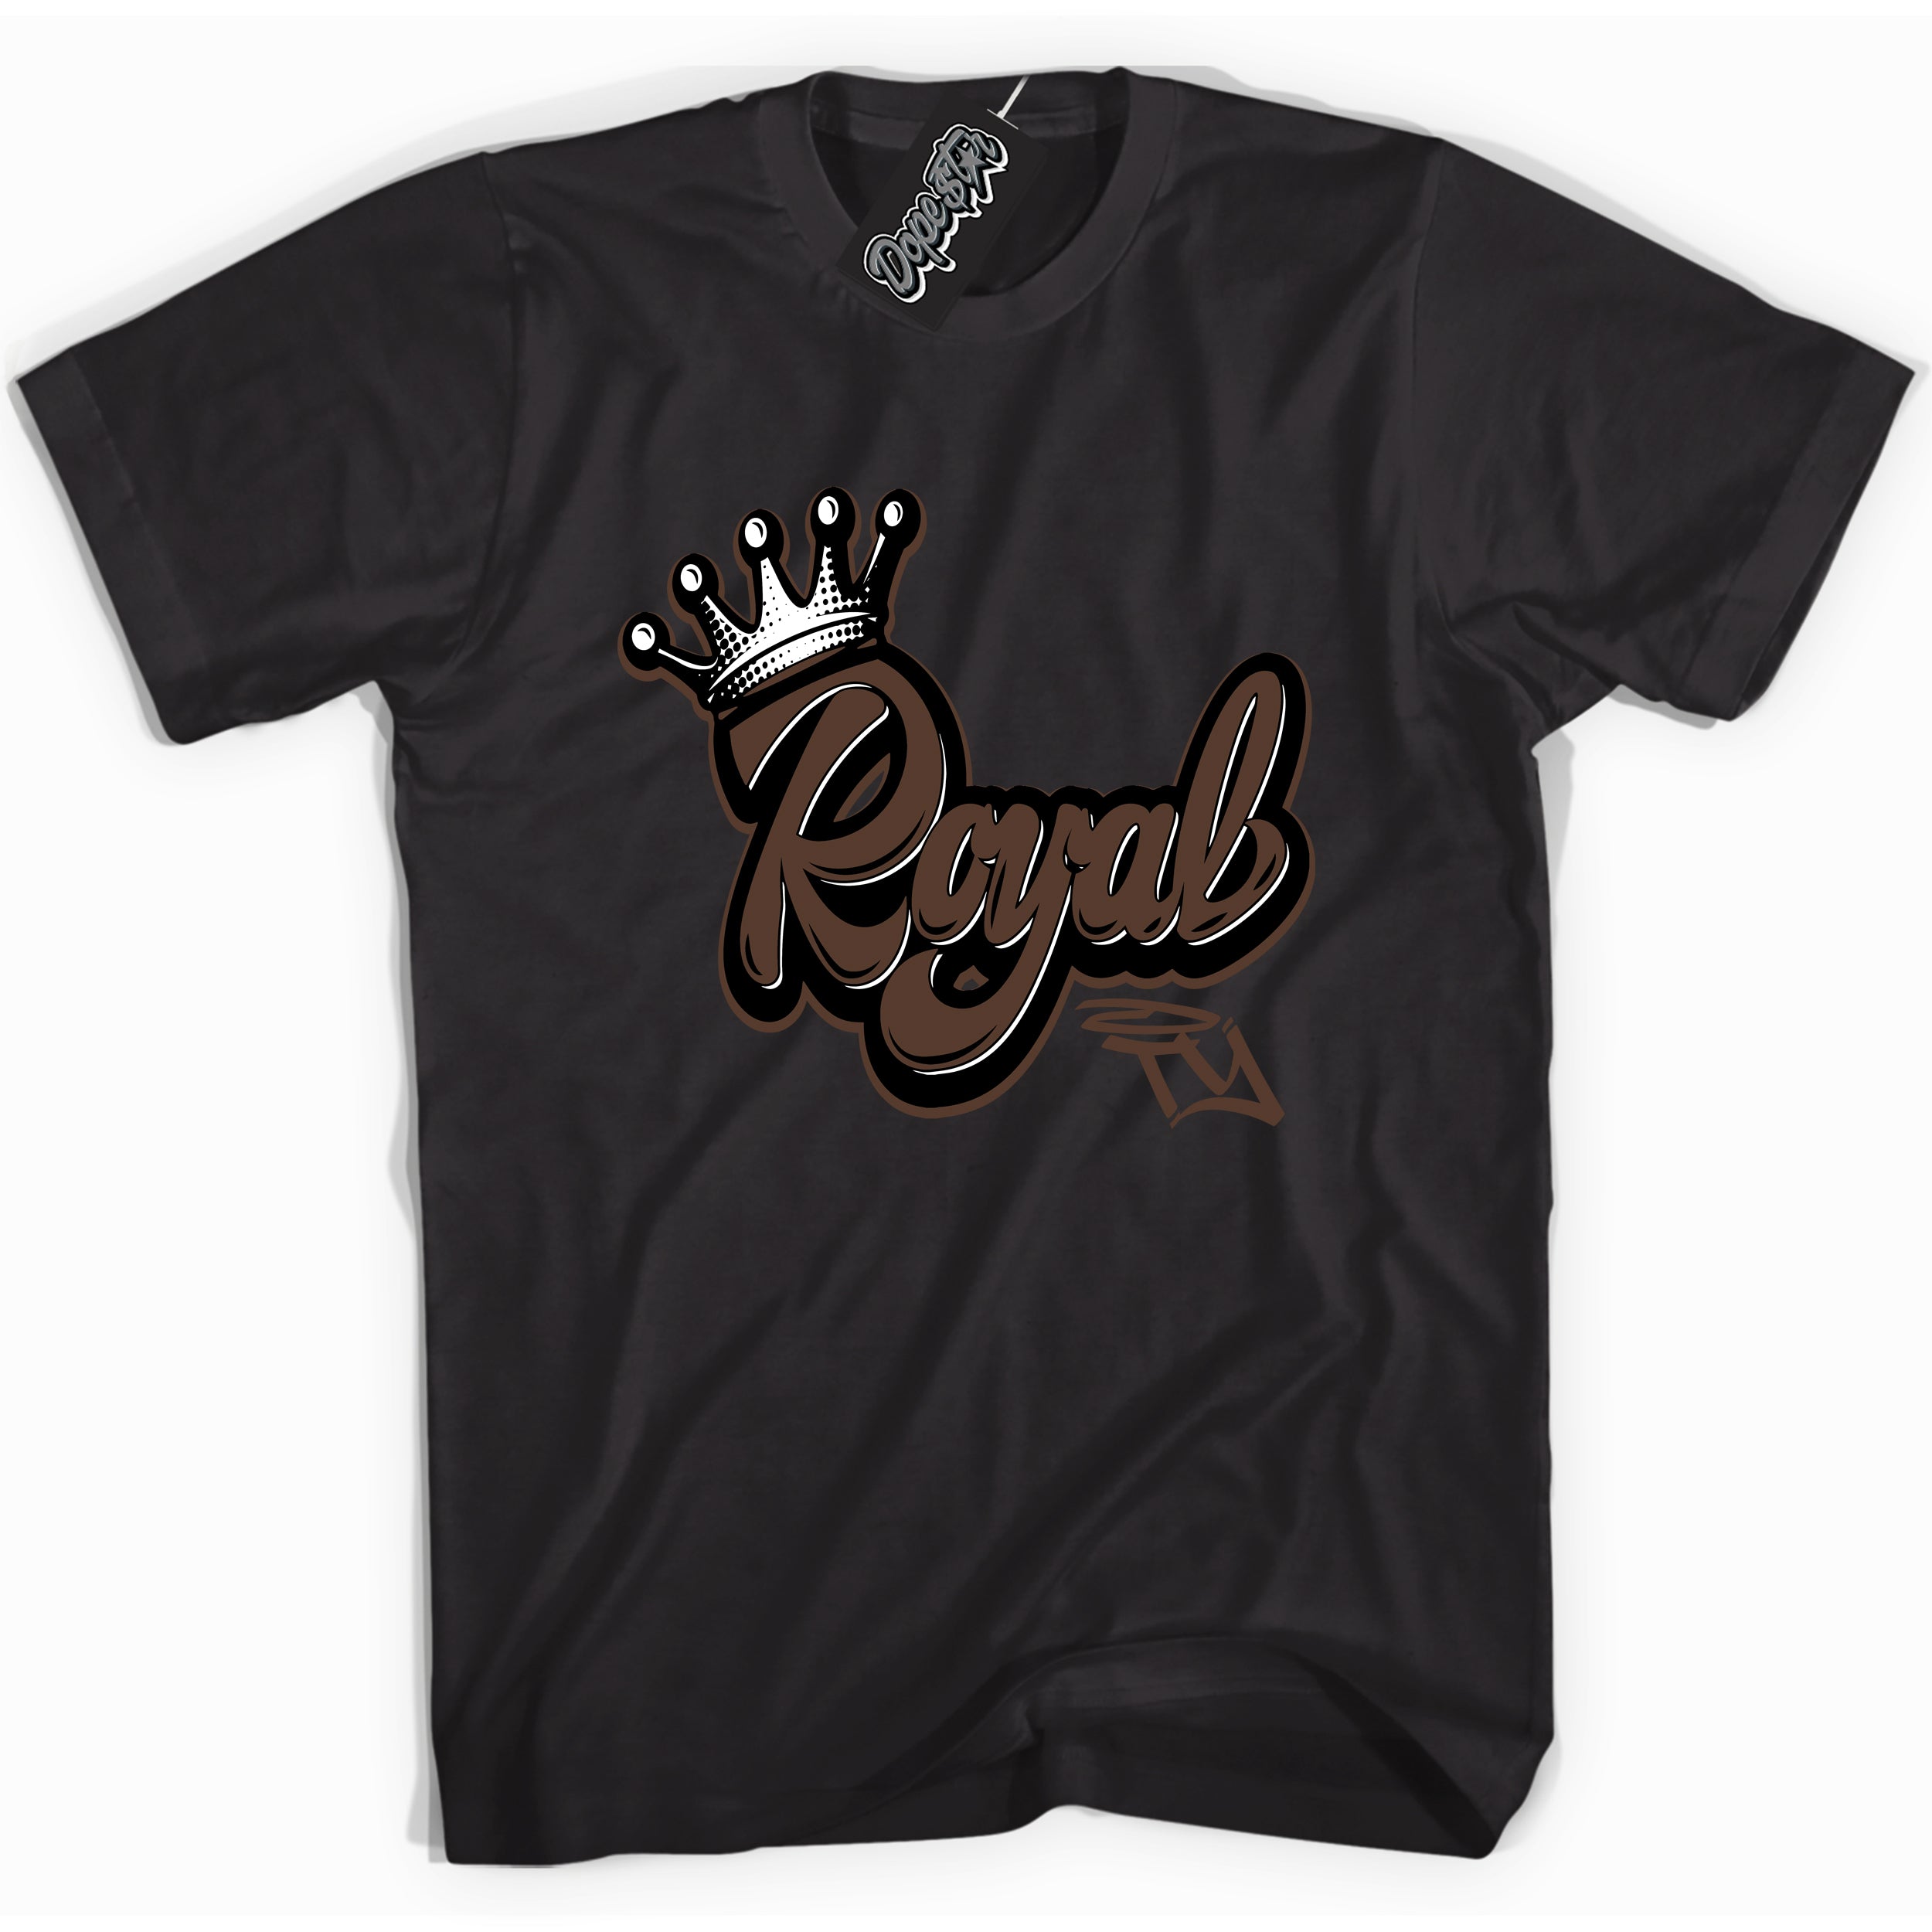 Cool Black graphic tee with “ Royalty ” design, that perfectly matches Palomino 1s sneakers 